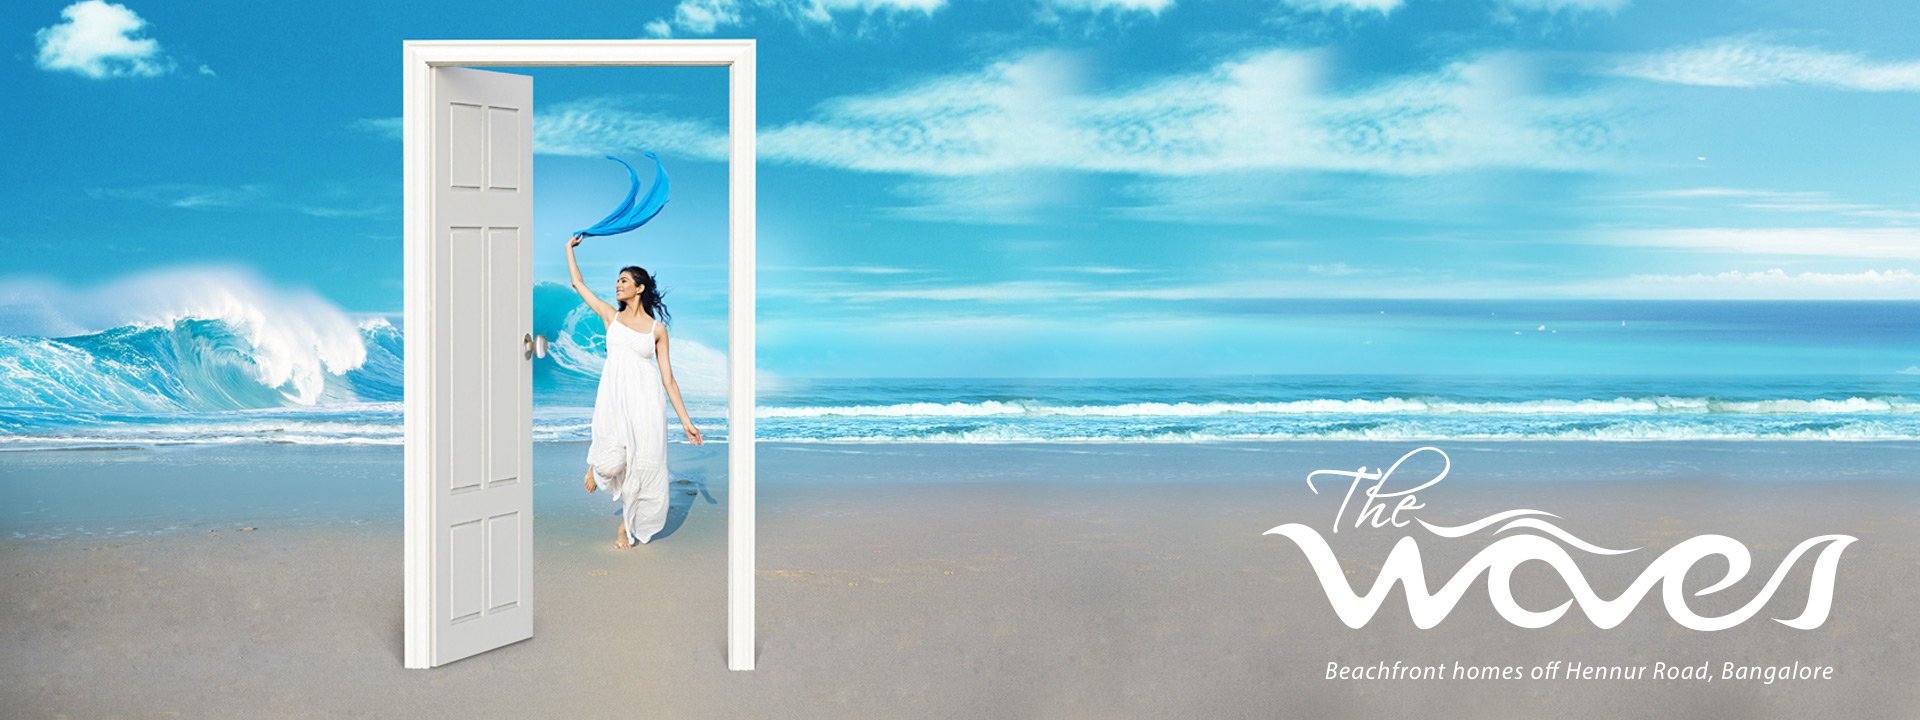 Purva The Waves offers you the landscape of a beach and tropical backwaters to your door step